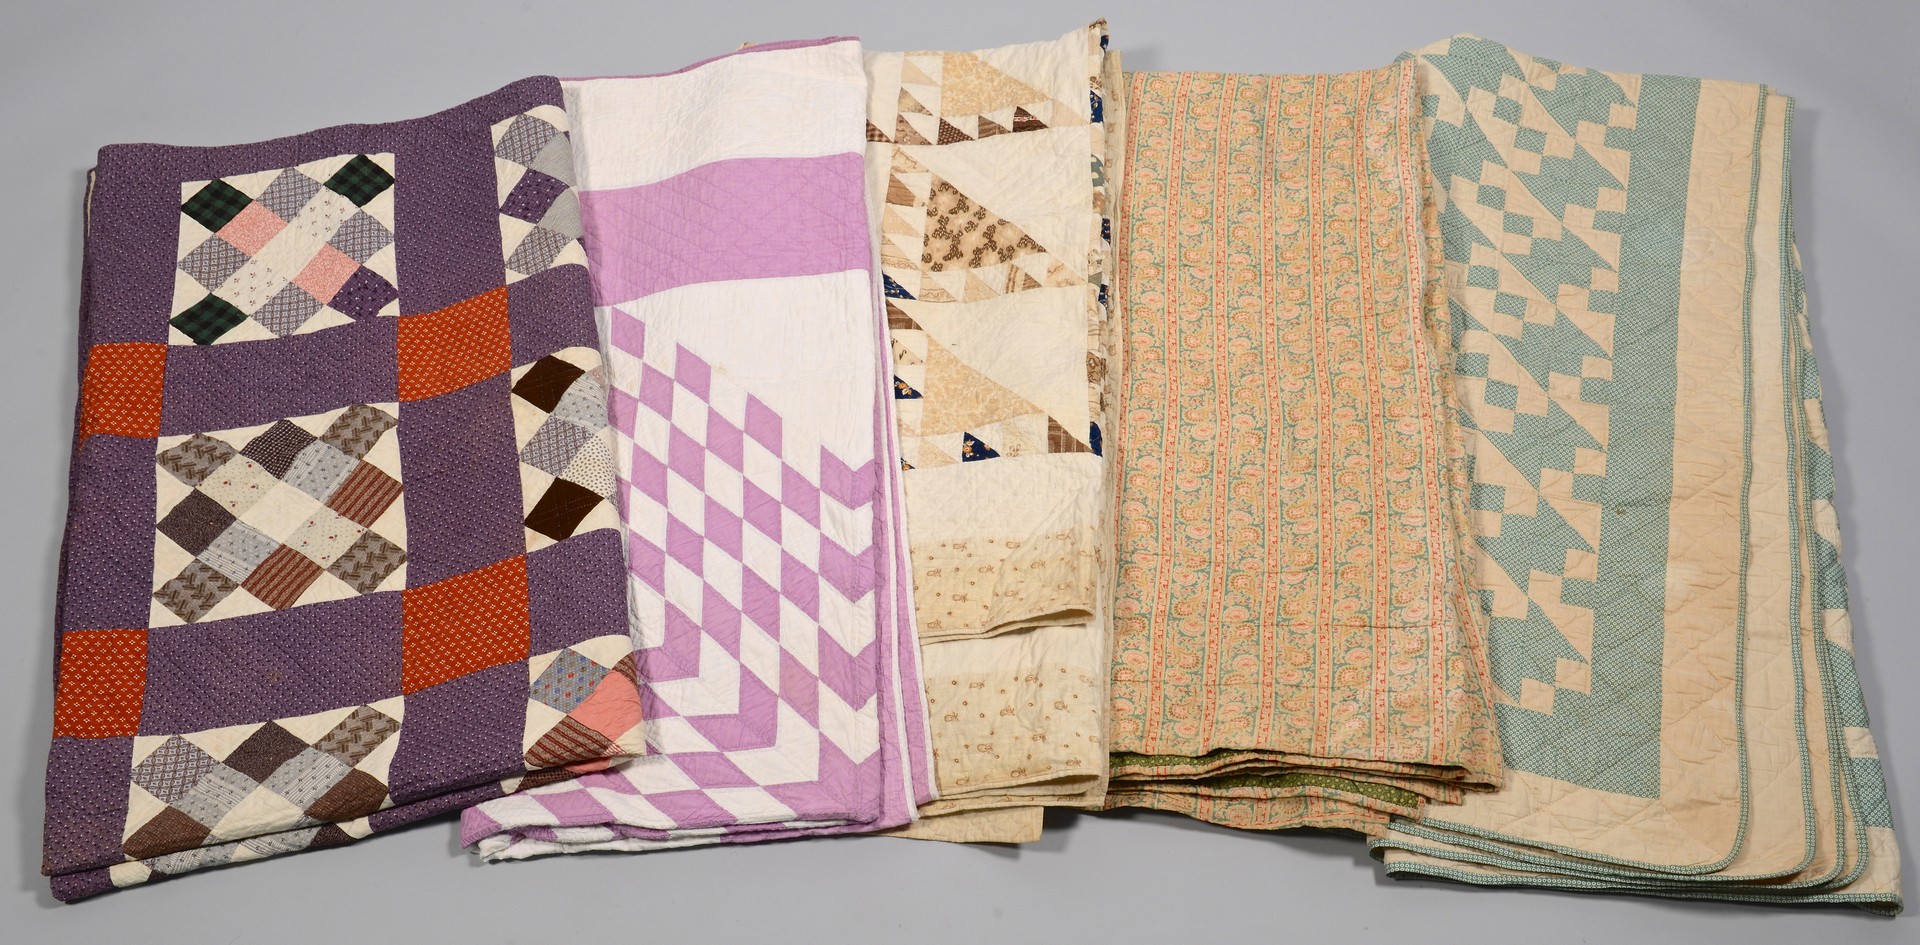 Lot 849: Group of 5 quilts, 1 signed